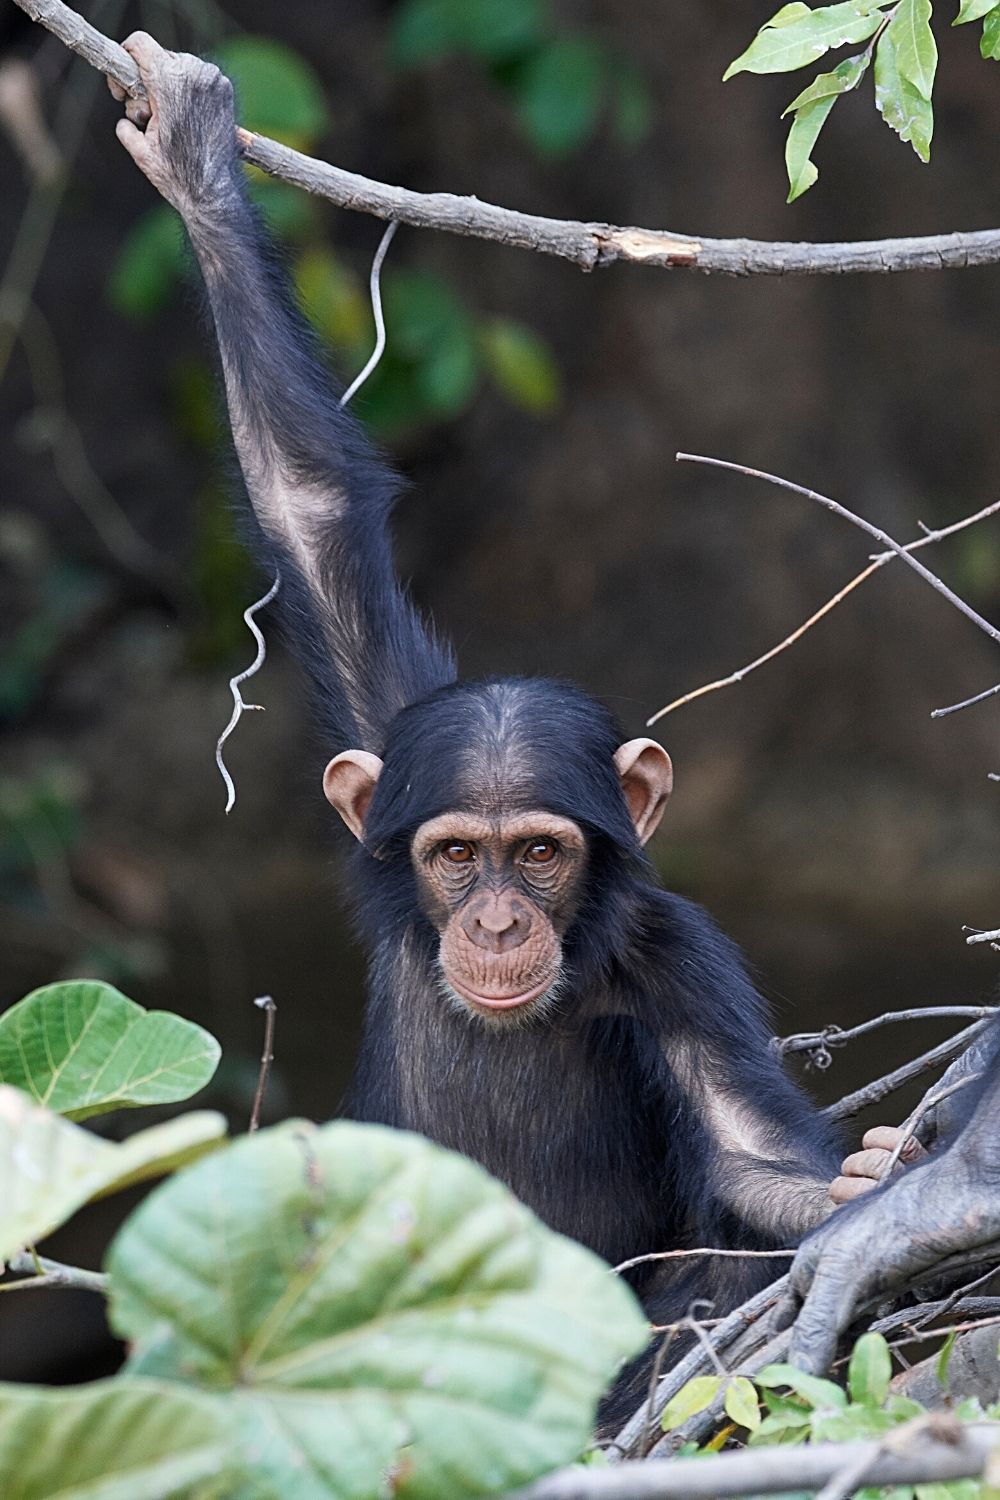 Chimpanzees need to be humble for them to work well with the other members of their community